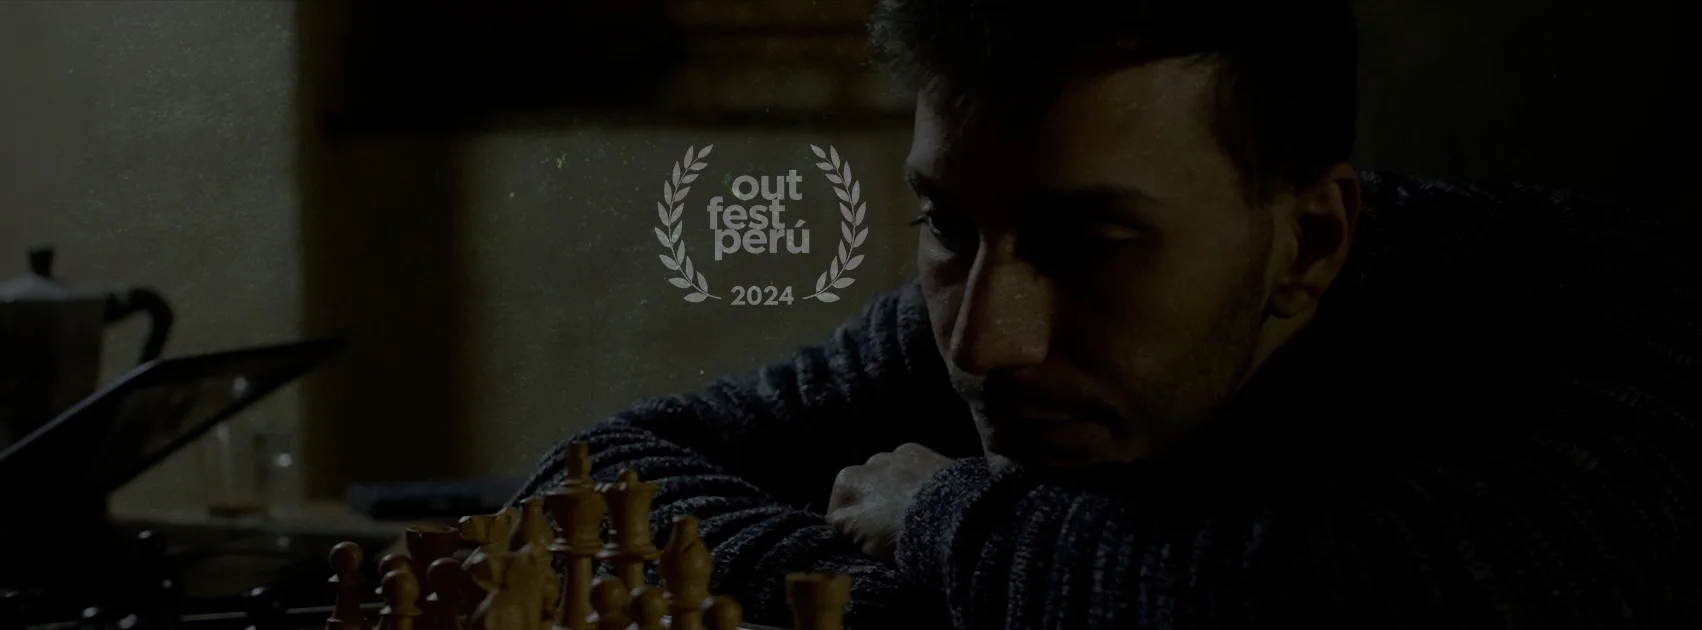 The short film "Arrocco" by Federico Yang is in the official selection of OutfestPerù Film Festival.